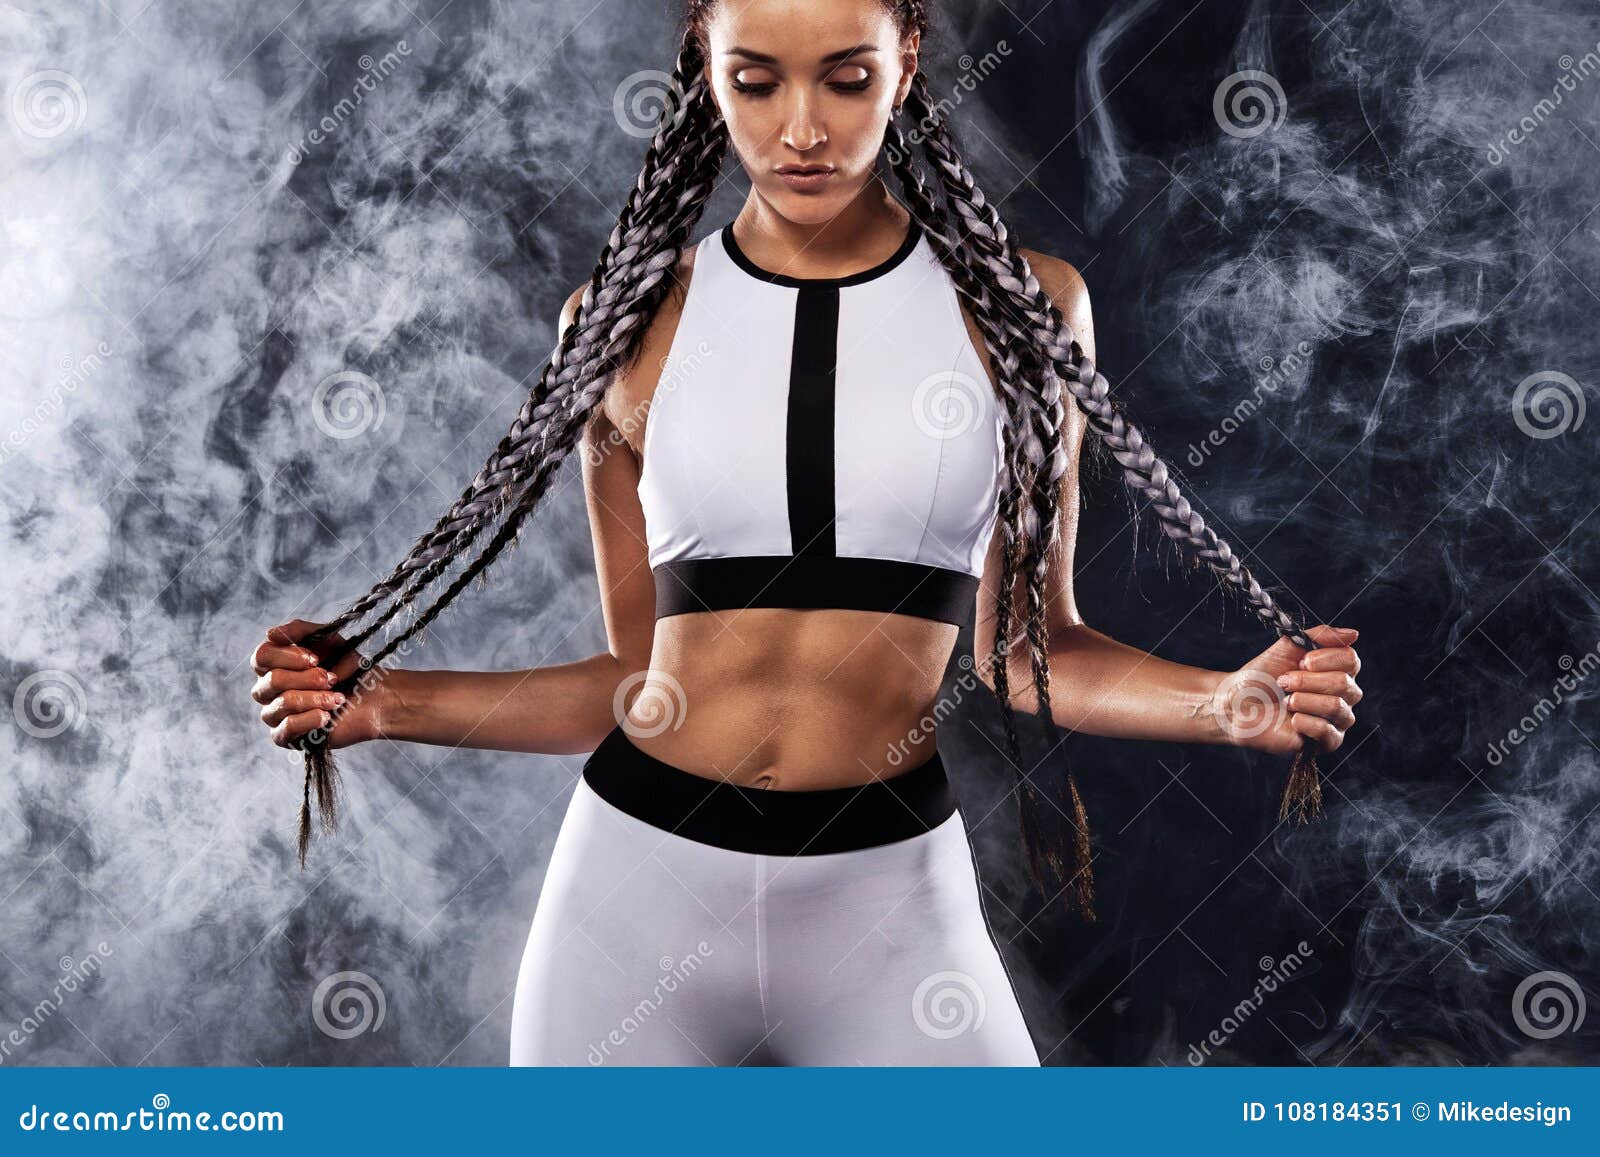 A Strong Athletic Woman on Black Background Wearing in White